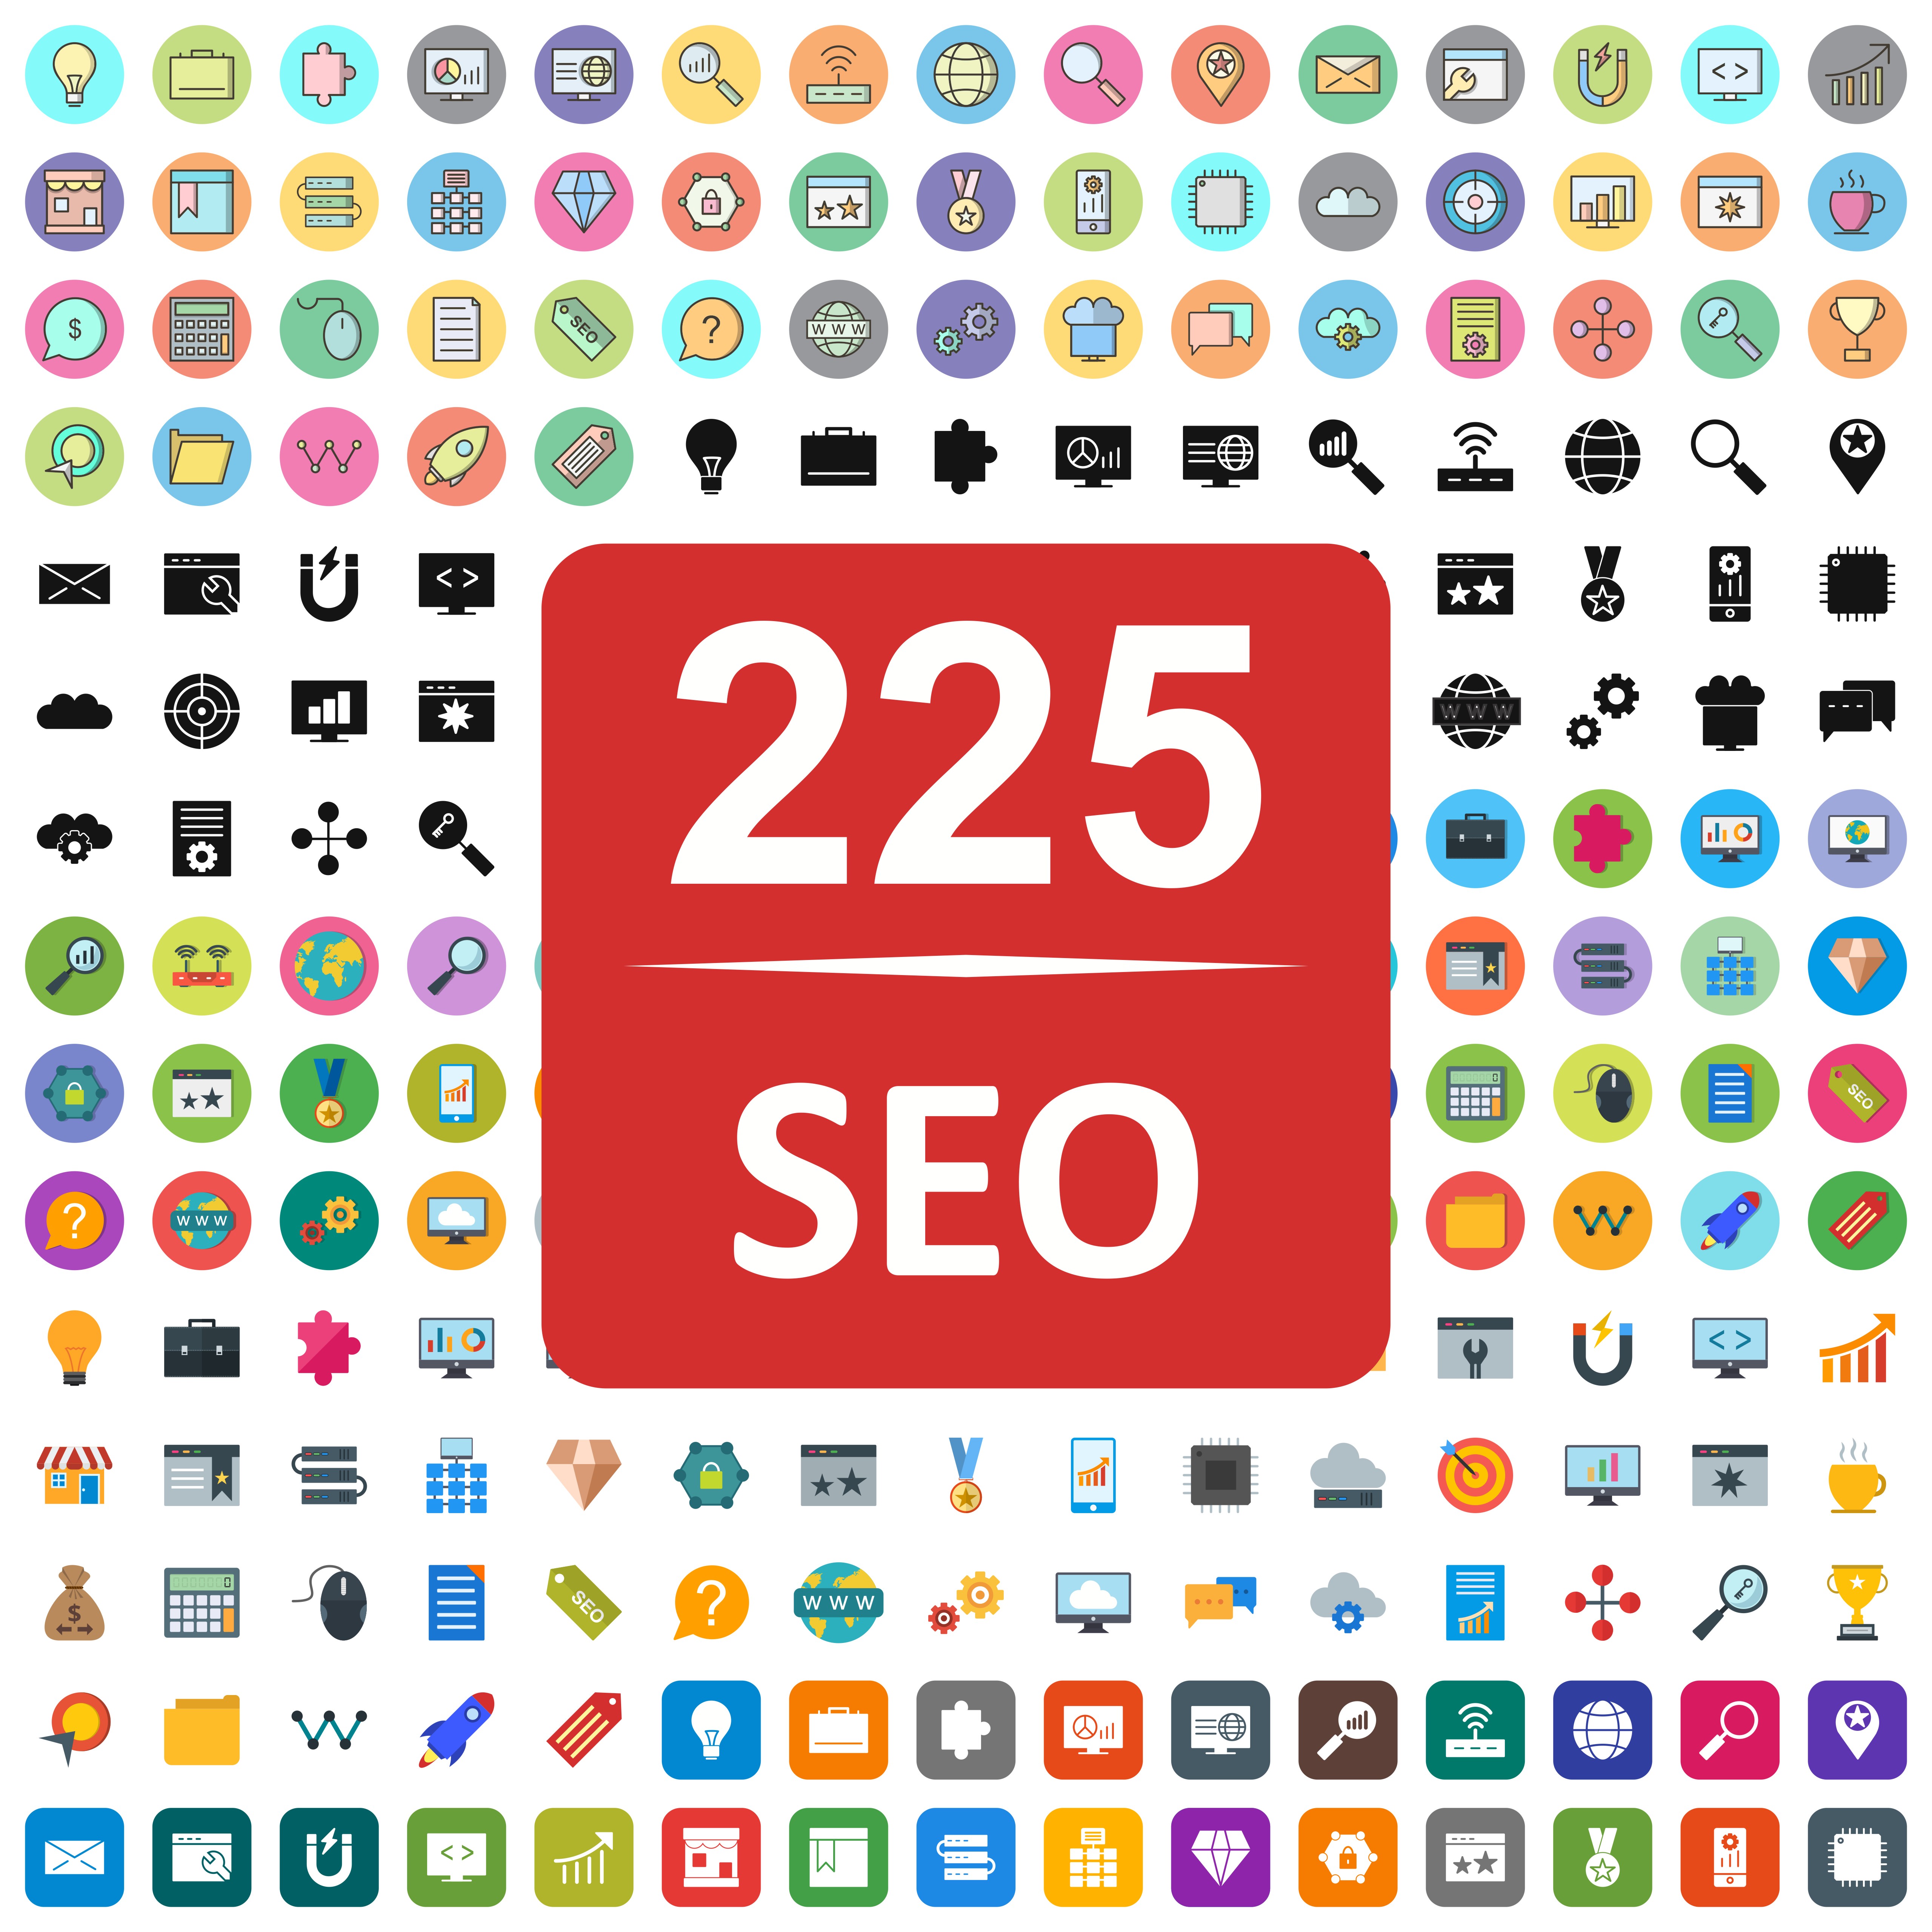 Download Set of Vector SEO Search Engine Optimization Icons ...